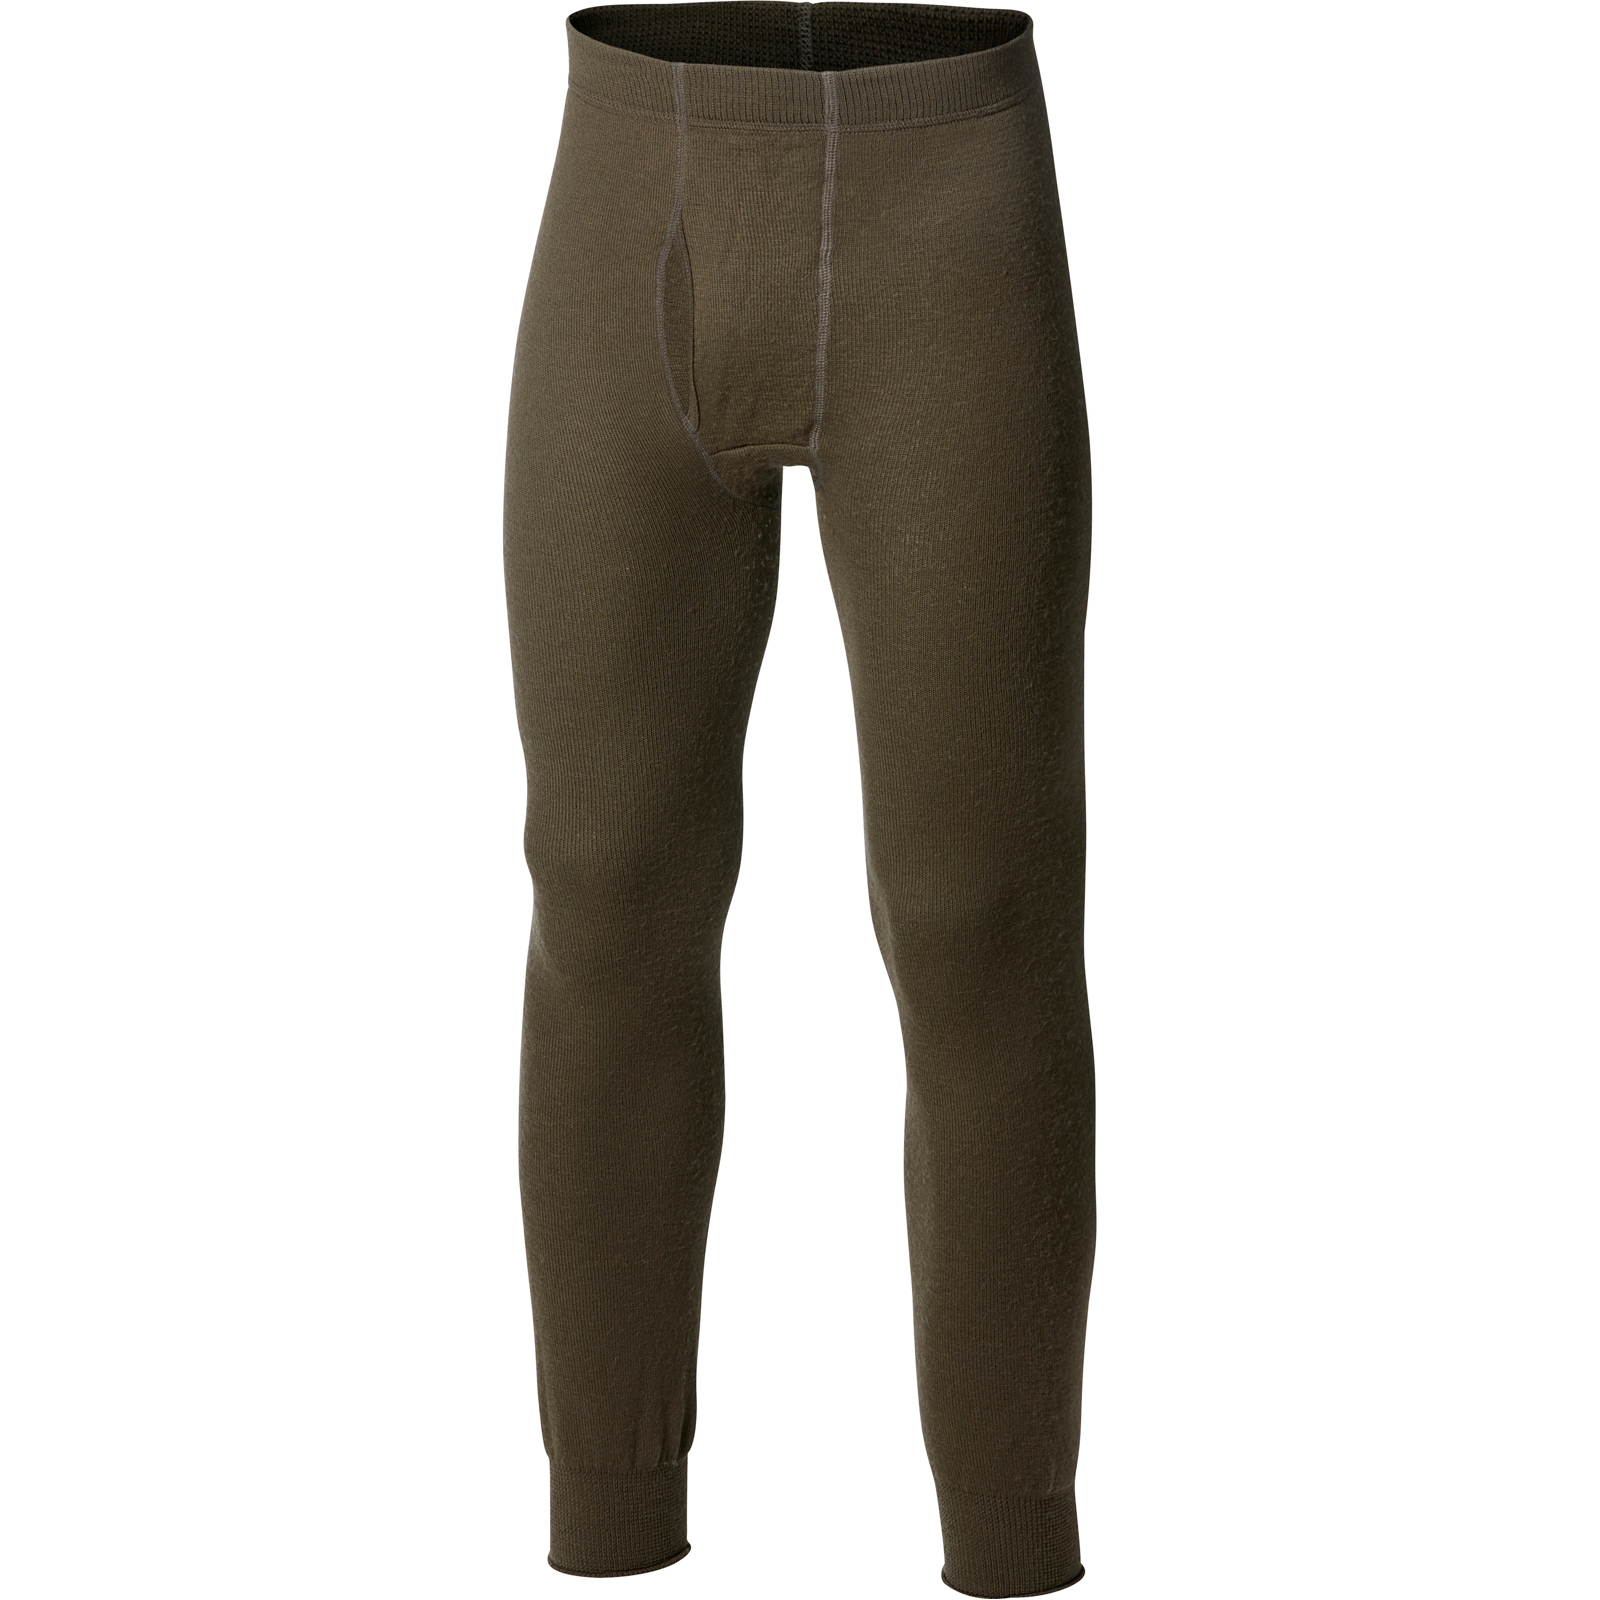 Long Johns with fly 400 - Woolpower UK